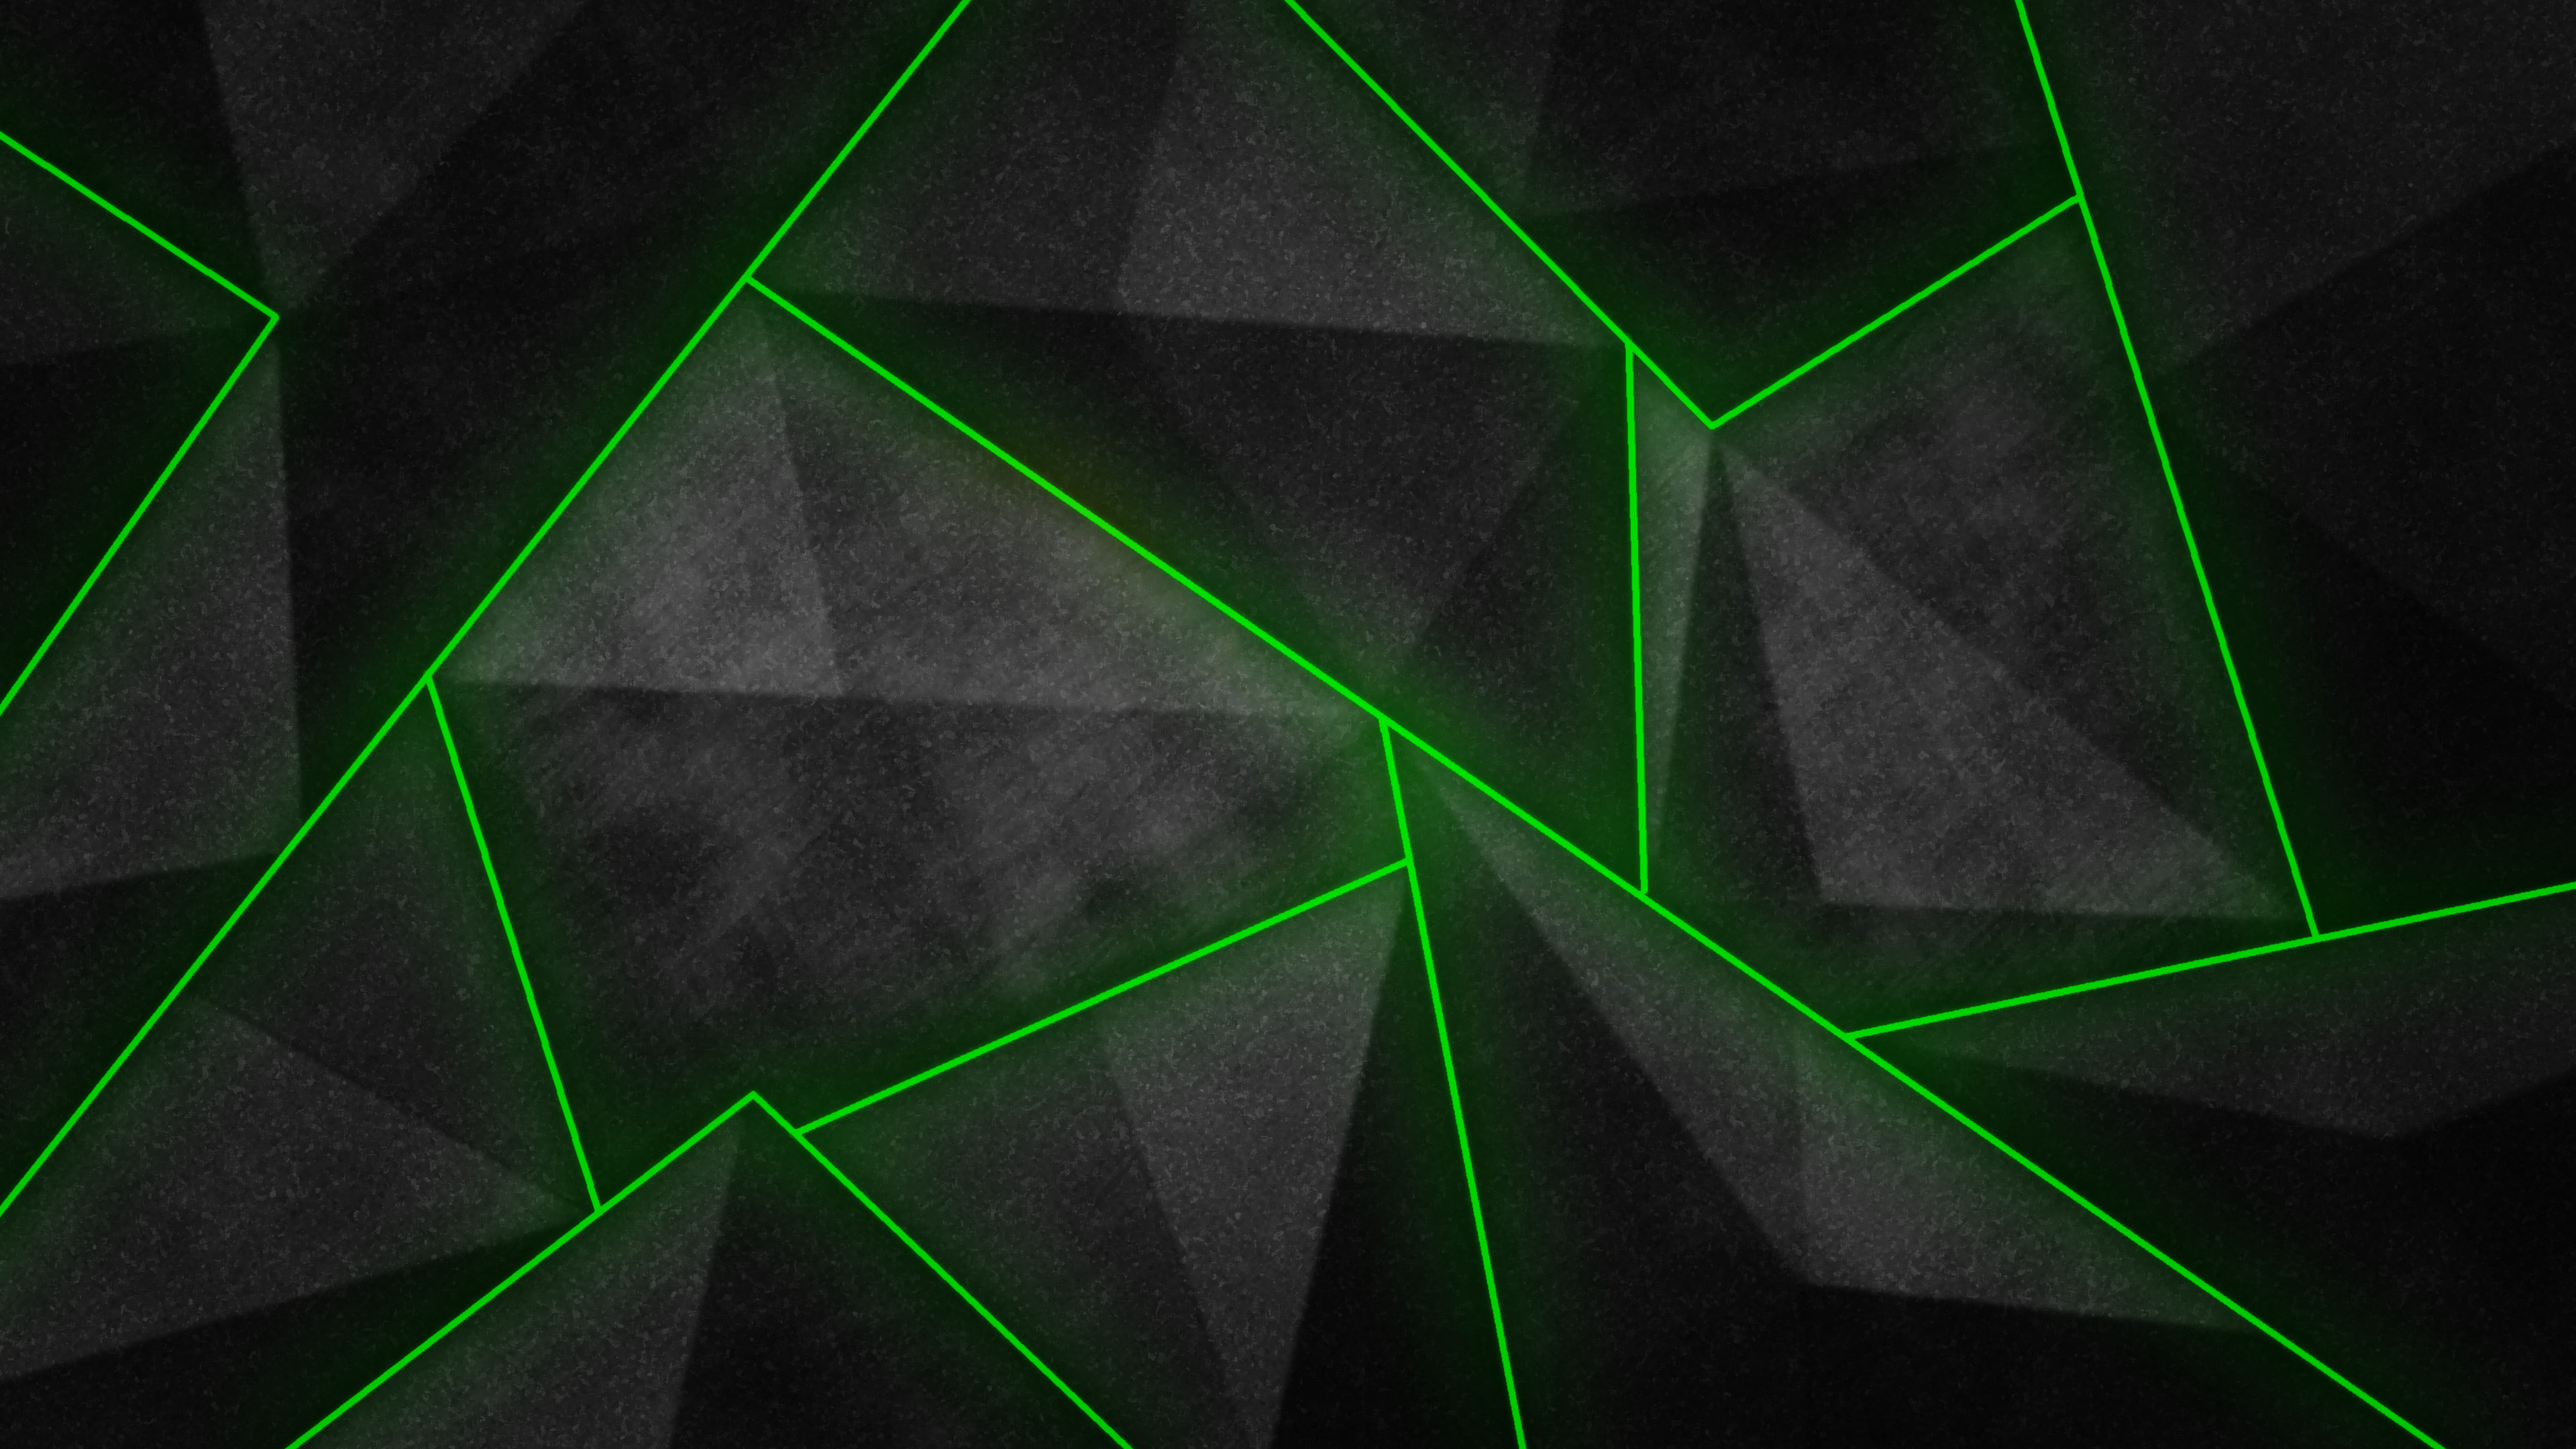 Black And Neon Green Wallpaper.